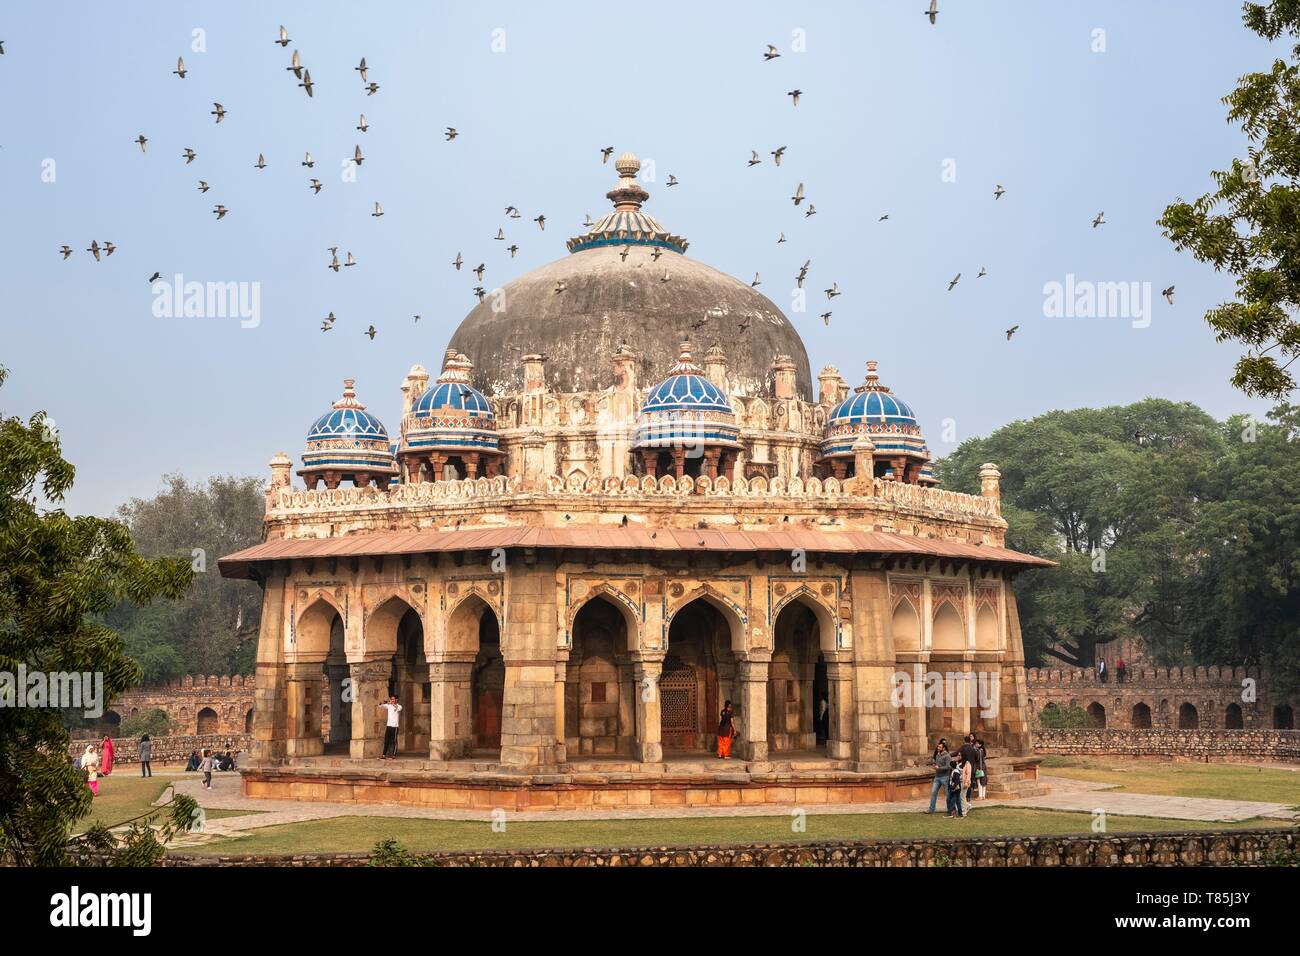 India, New Delhi, Humayun's tomb, Mughal architecture complexe declared a UNESCO World Heritage Site, Isa Khan's tomb Stock Photo